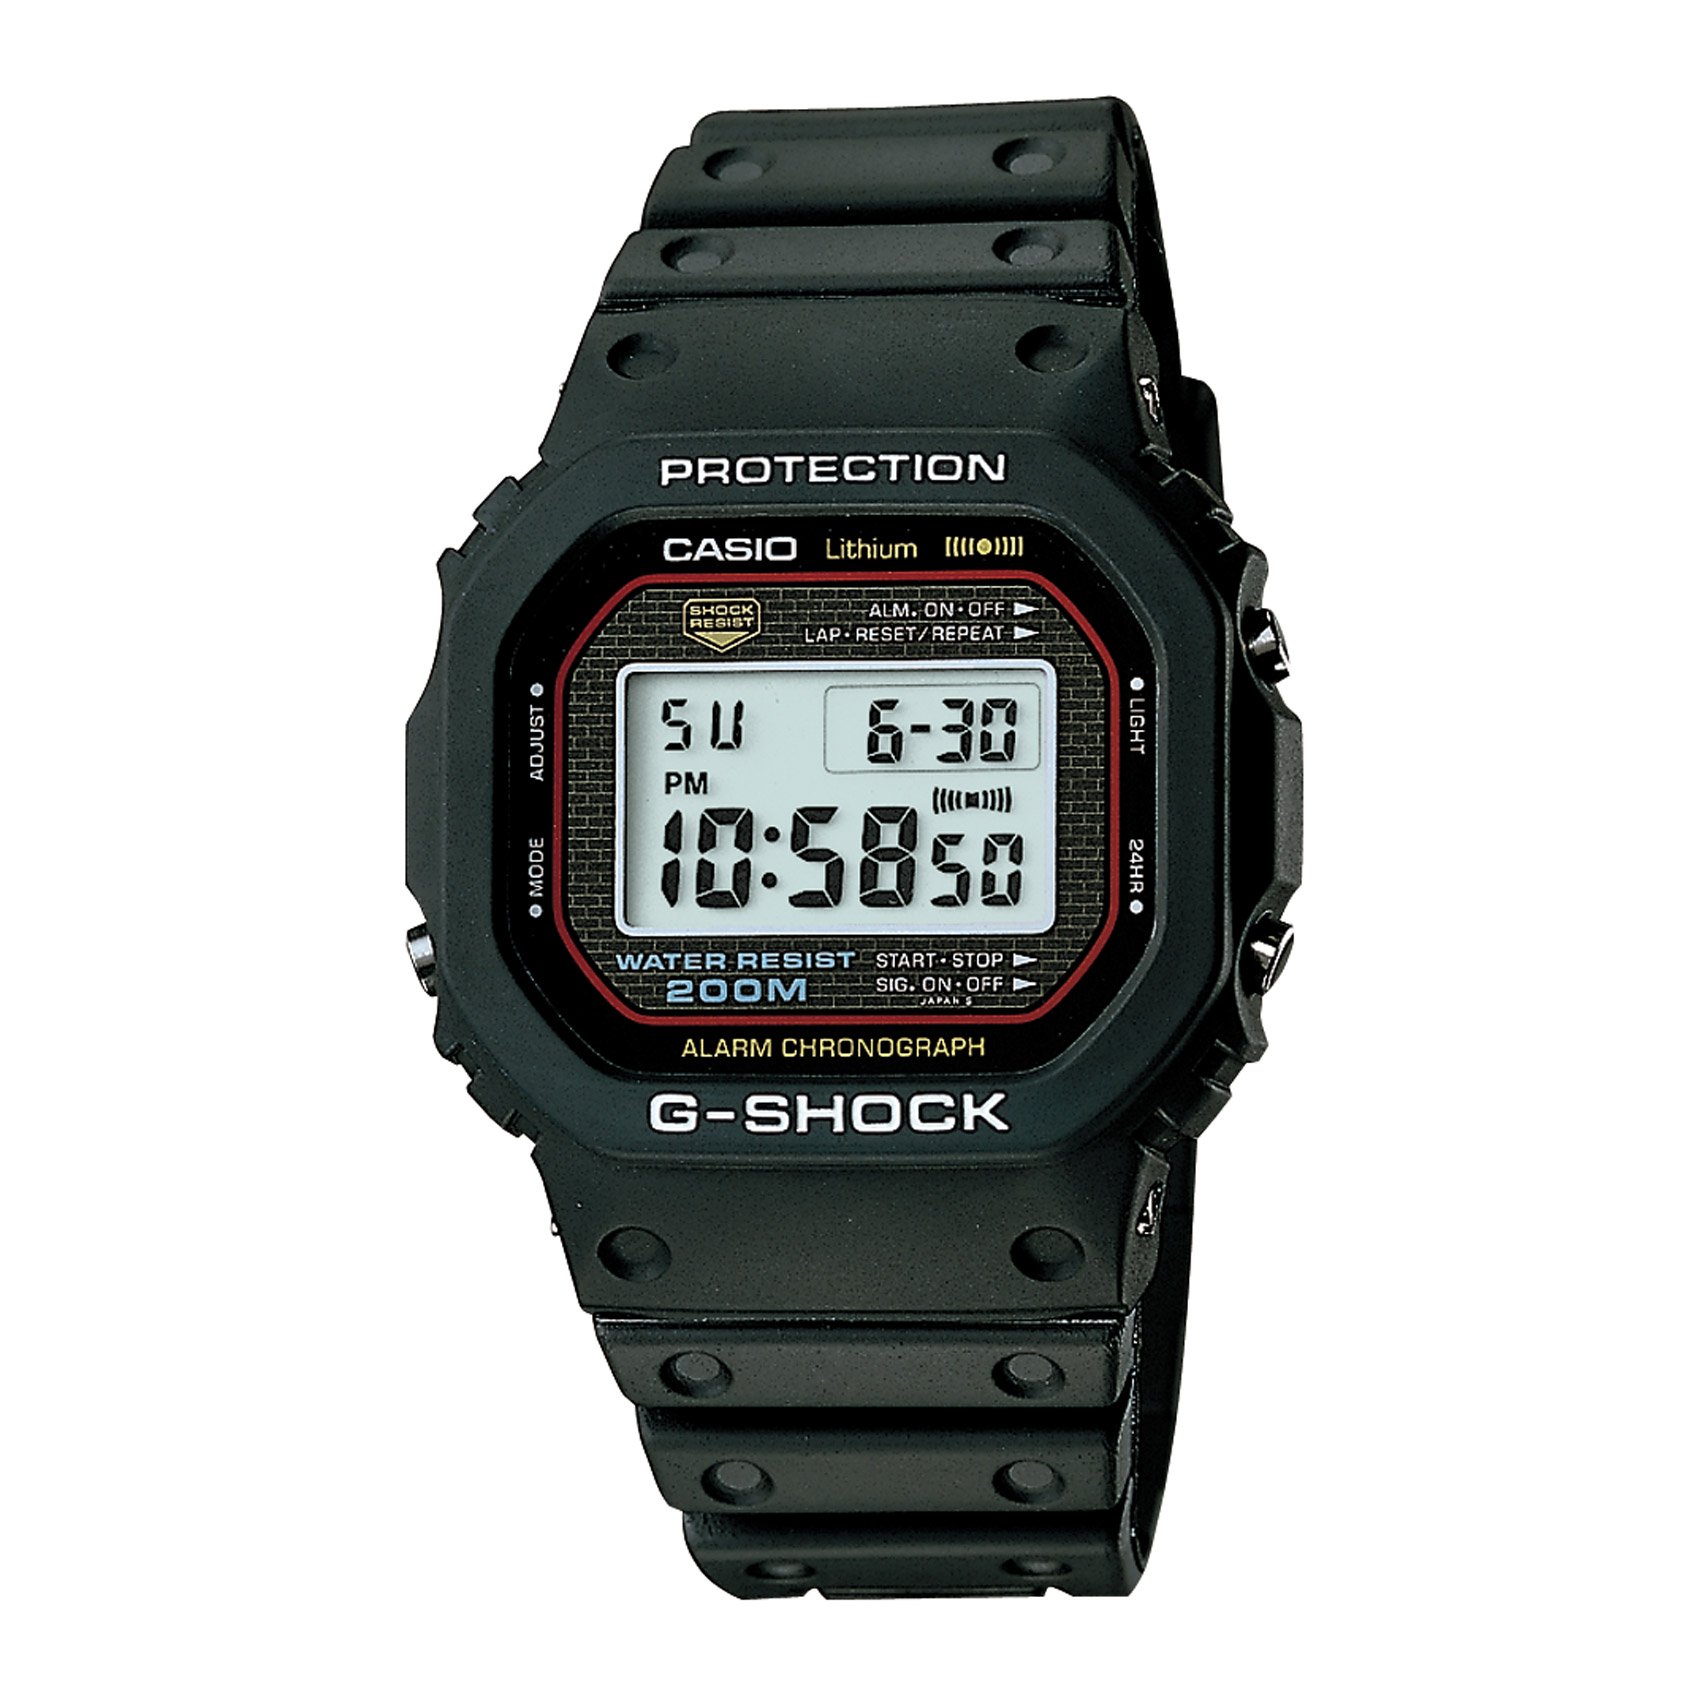 In 1983, Casio launched the first shock-resistant G-Shock watch